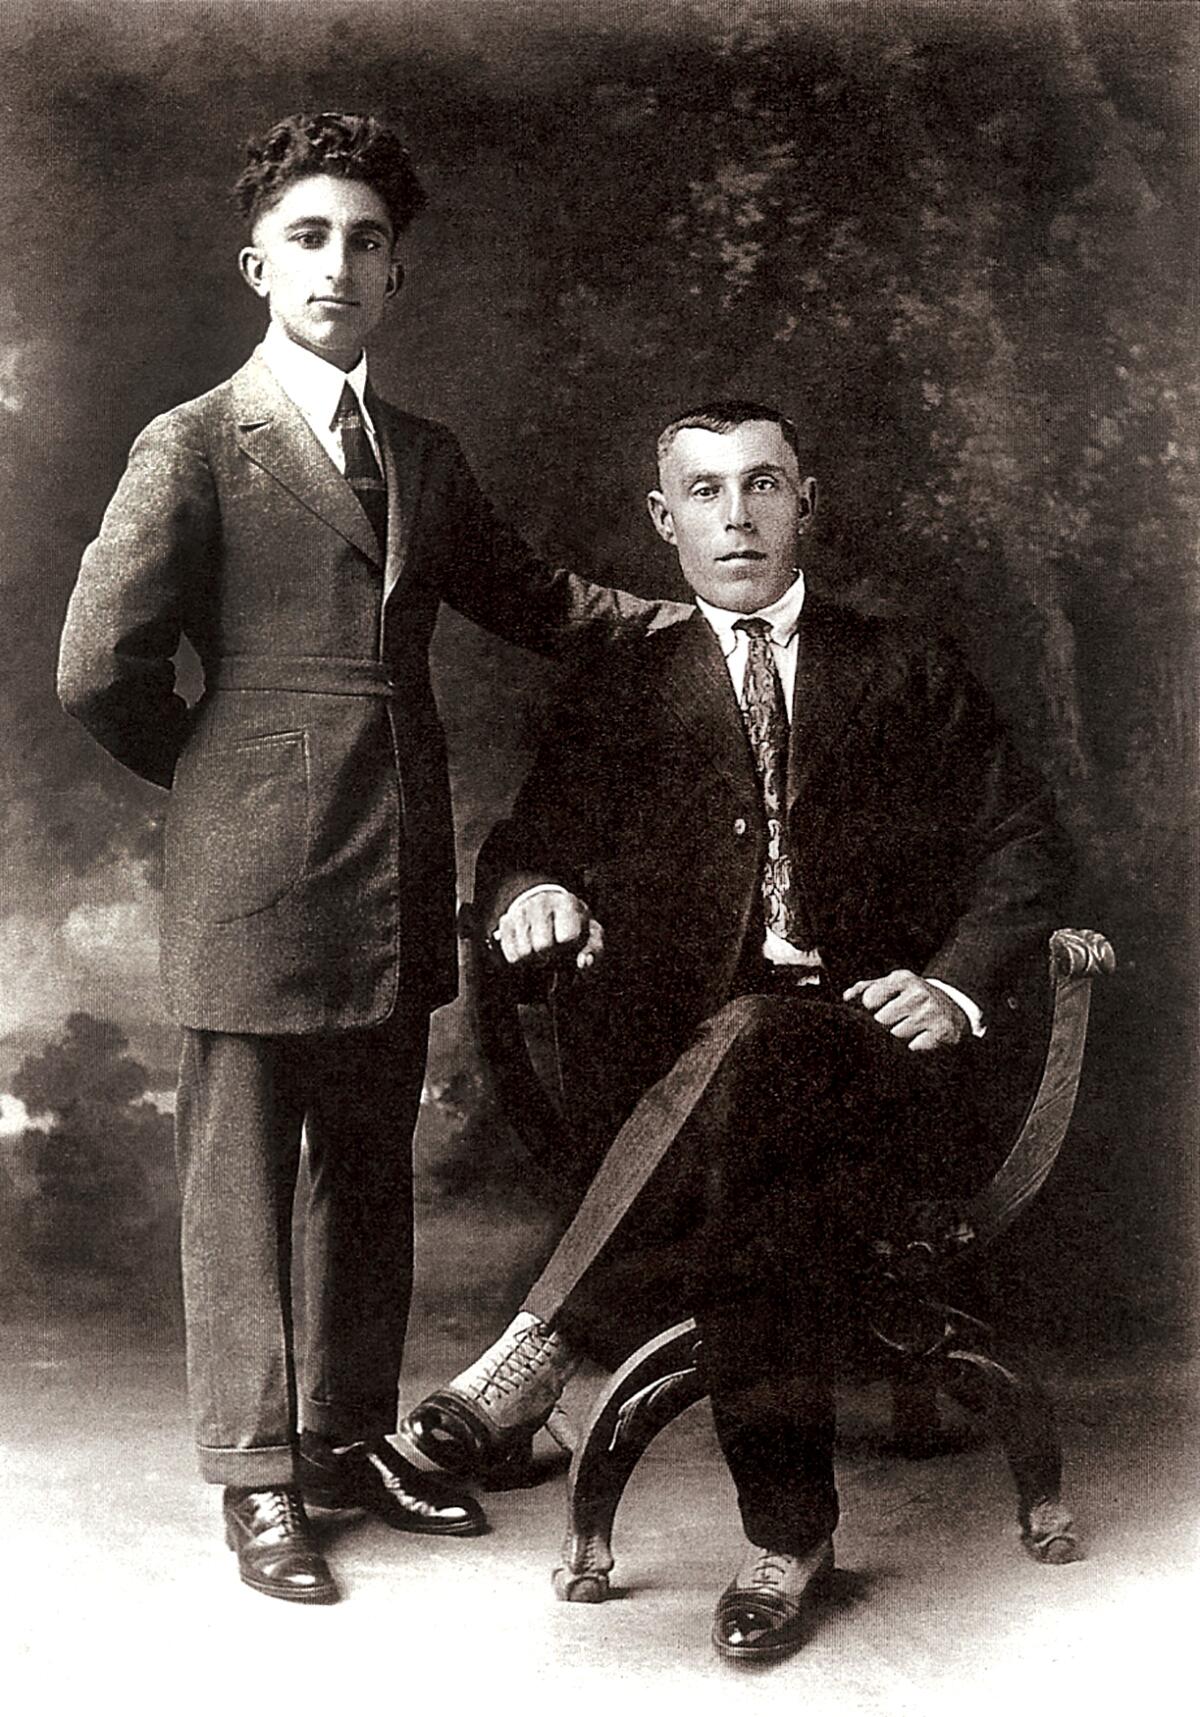 Aram Arax, standing, with Yervant Janigian shortly after they arrived in Fresno, Calif. in 1920.